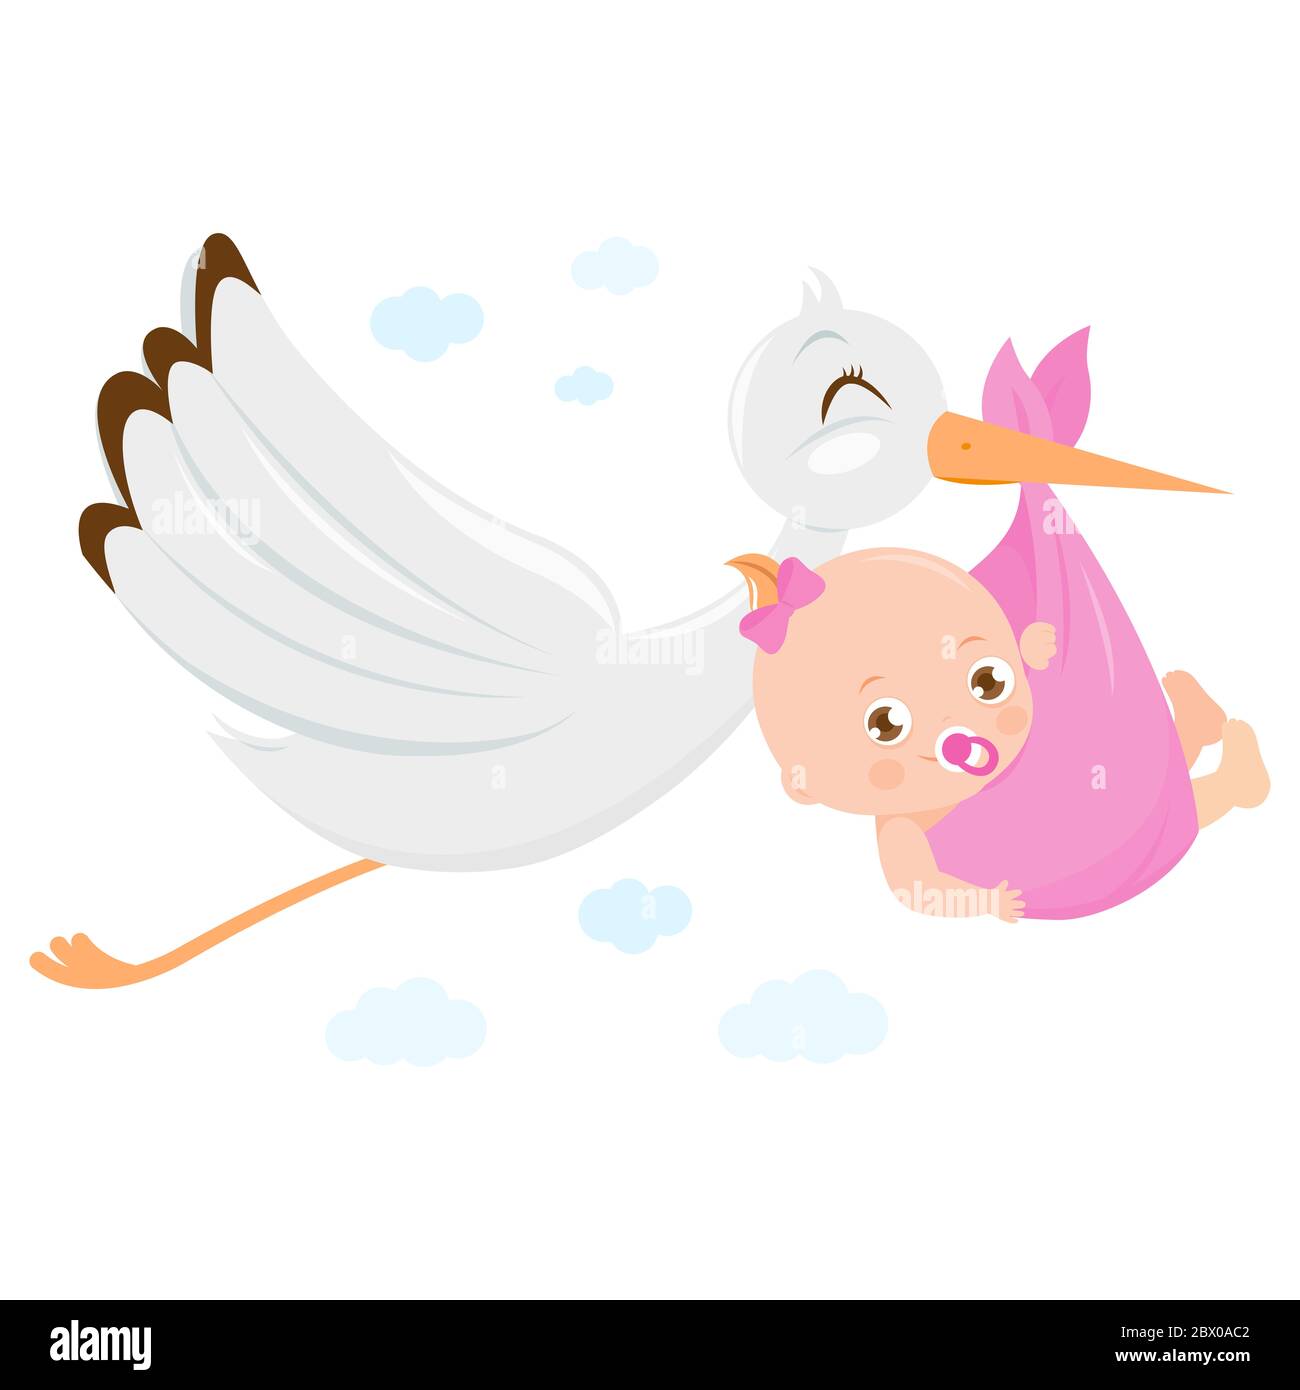 A stork flying in the sky and delivering a cute newborn baby girl. Stock Photo